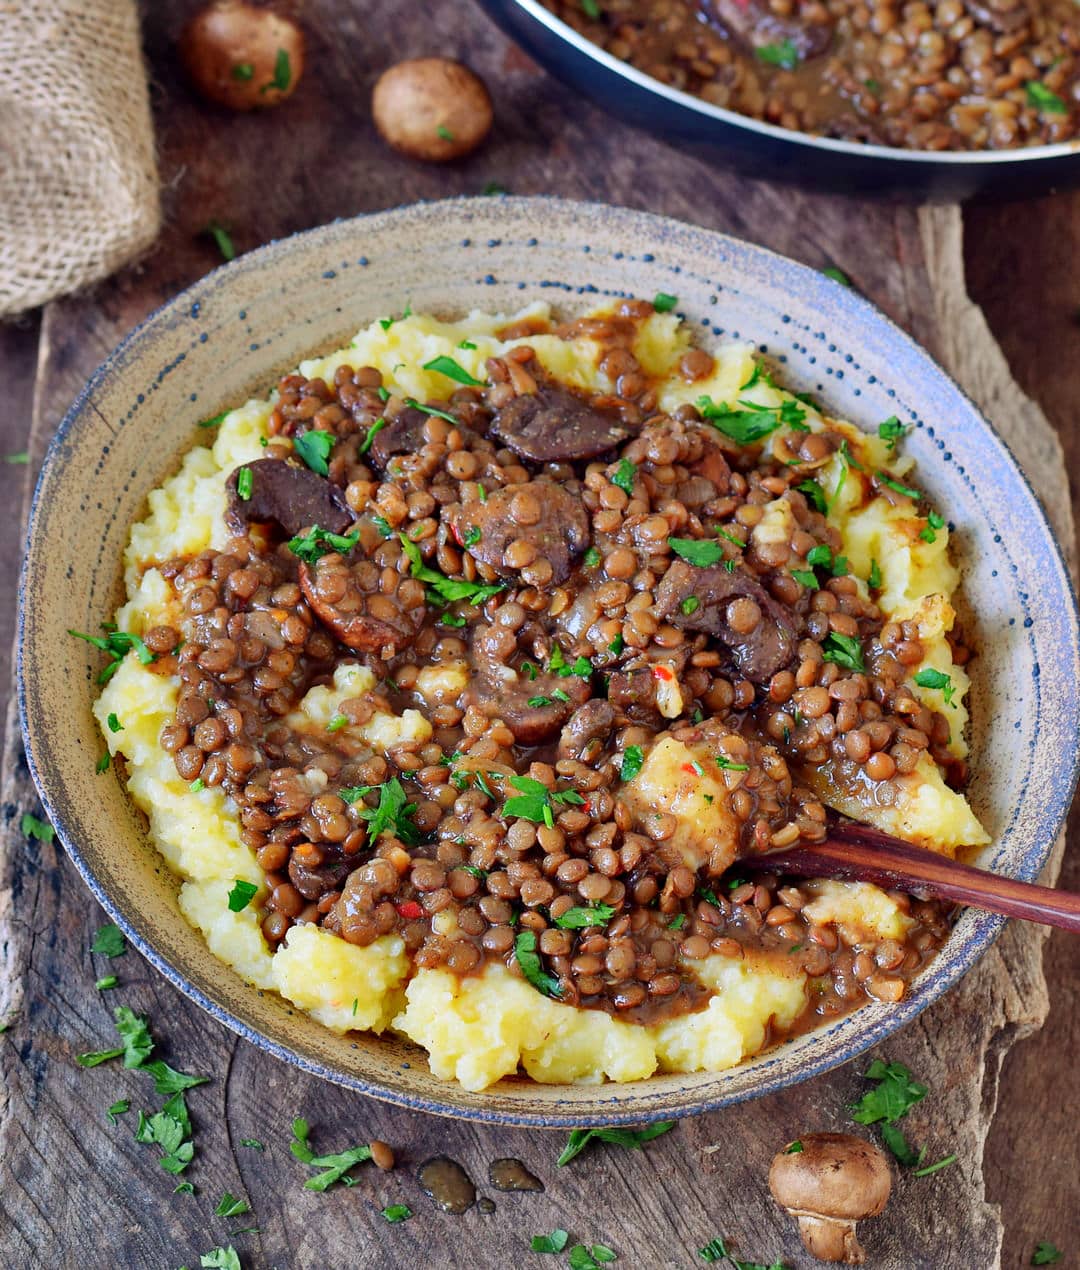 Mashed potatoes in a bowl with lentils and mushrooms.